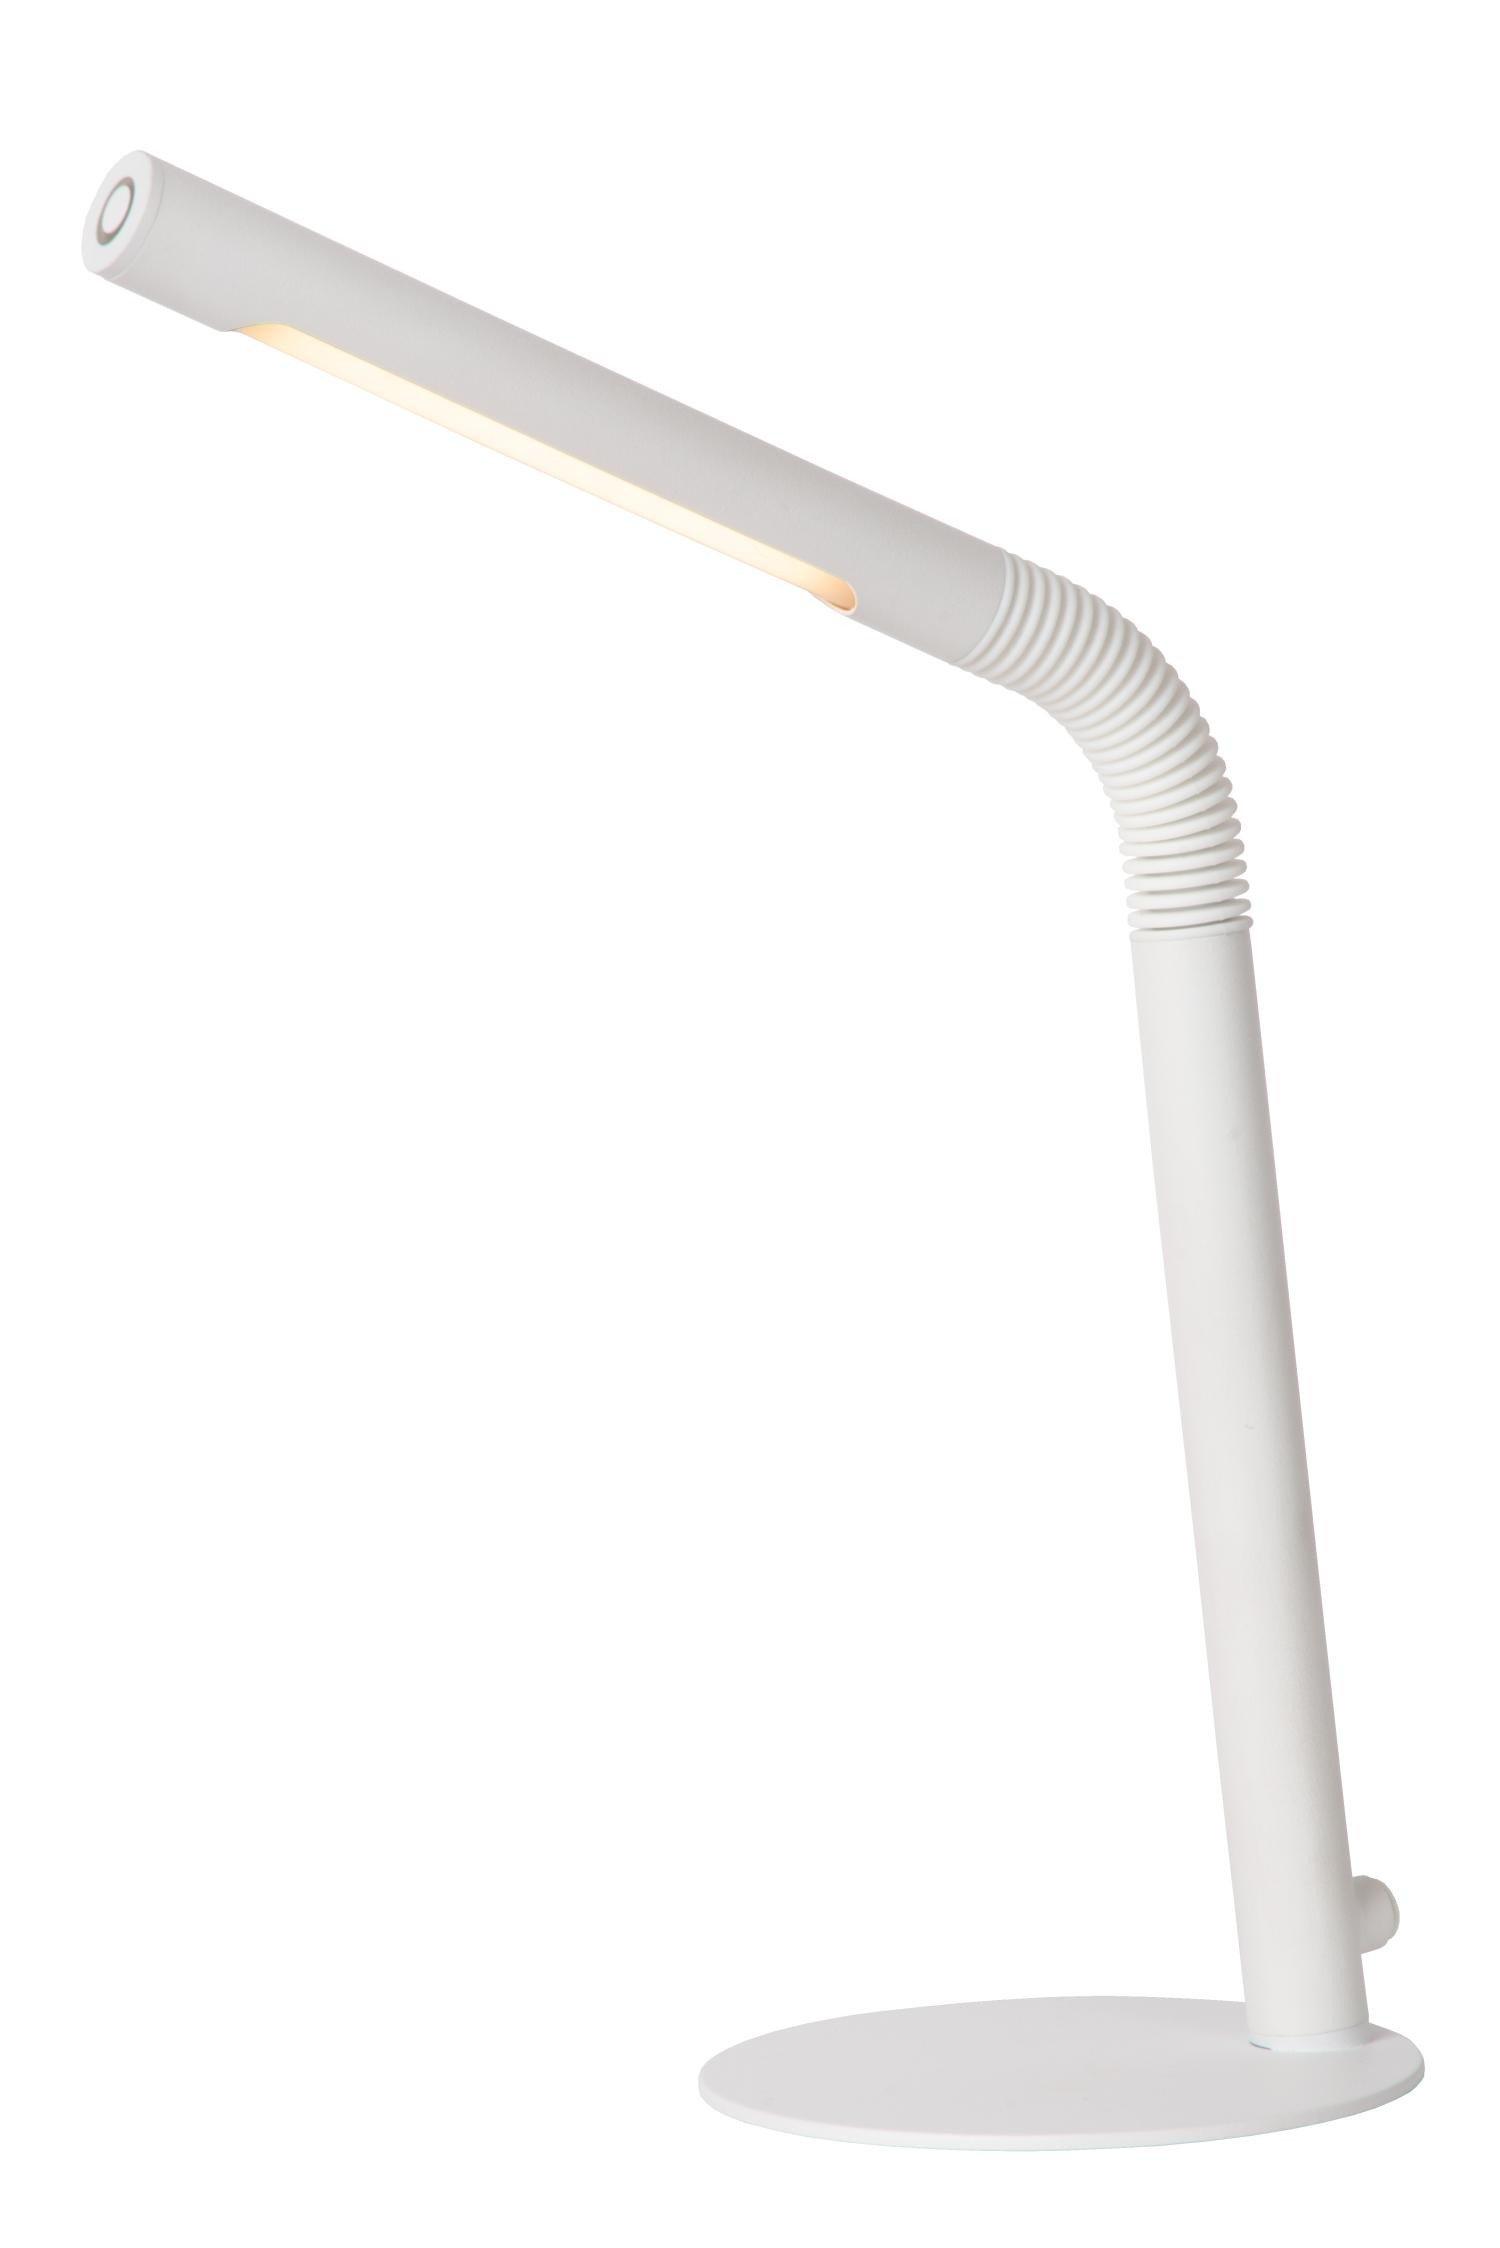 Lucide Gilly Classic Desk Lamp LED Dim. 1x3W 2700K White